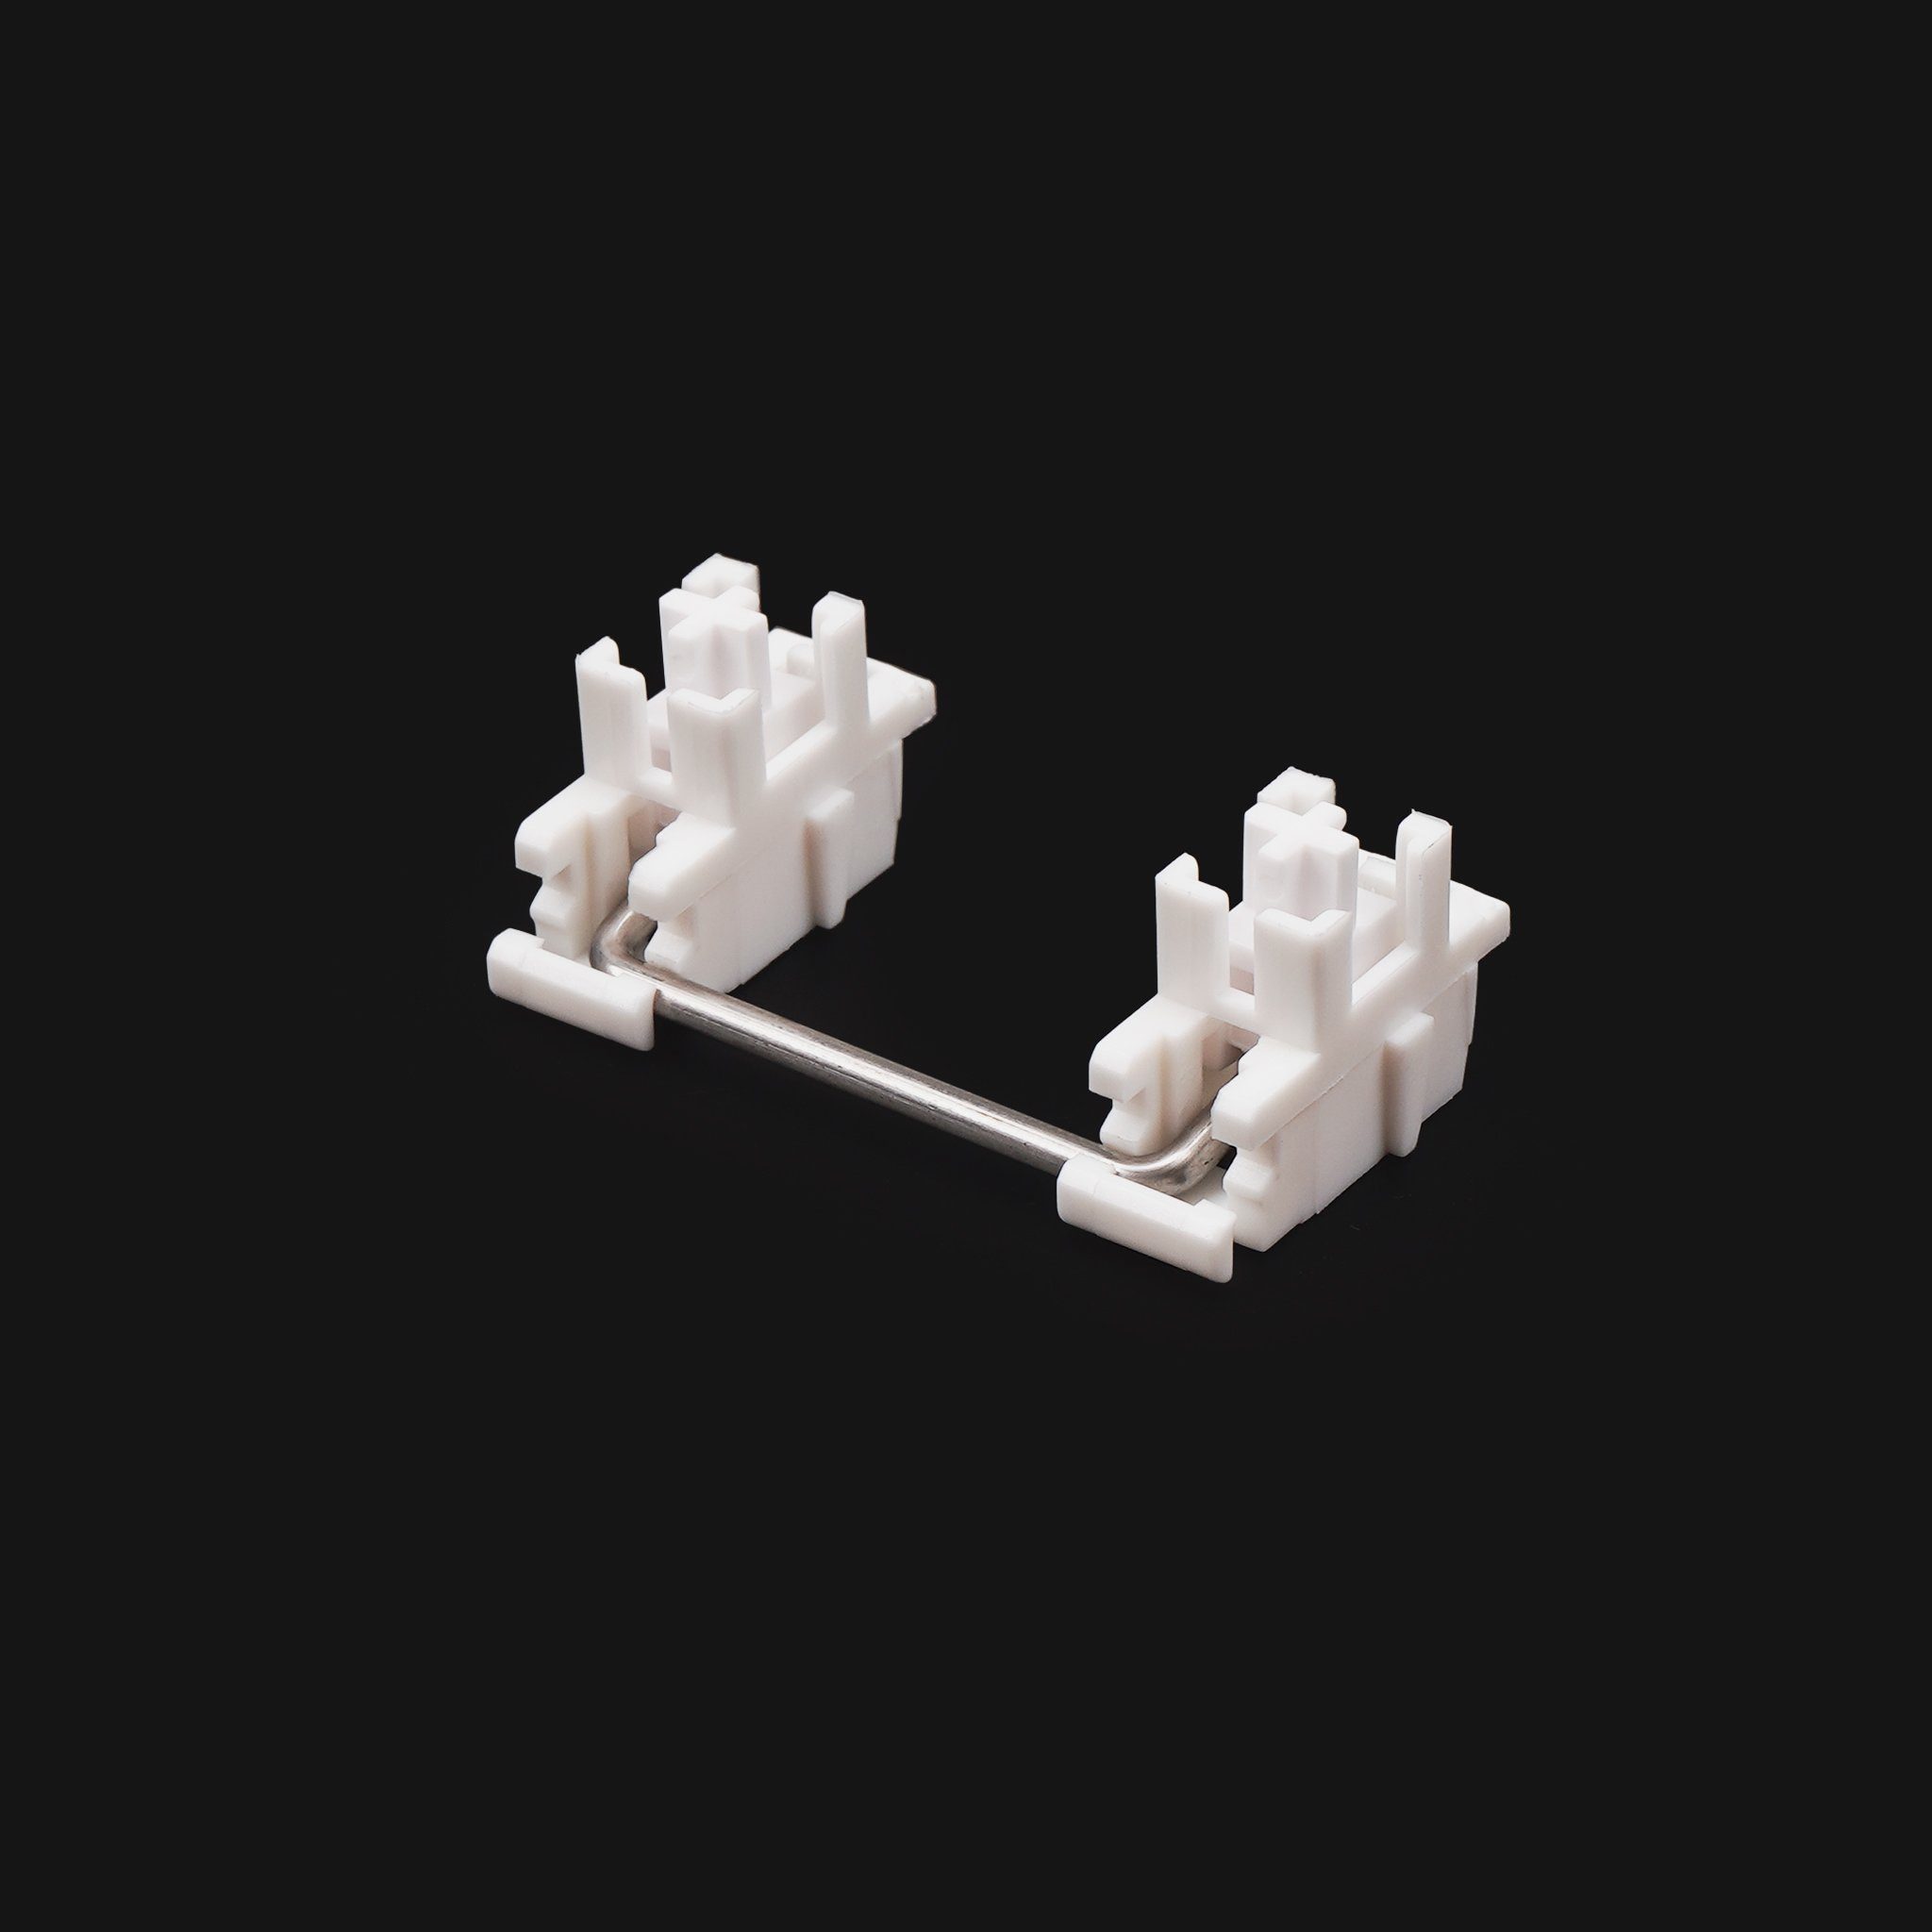 Gateron Pre-Lubed Plate Mounted Stablizers For Mechanical Keyboard